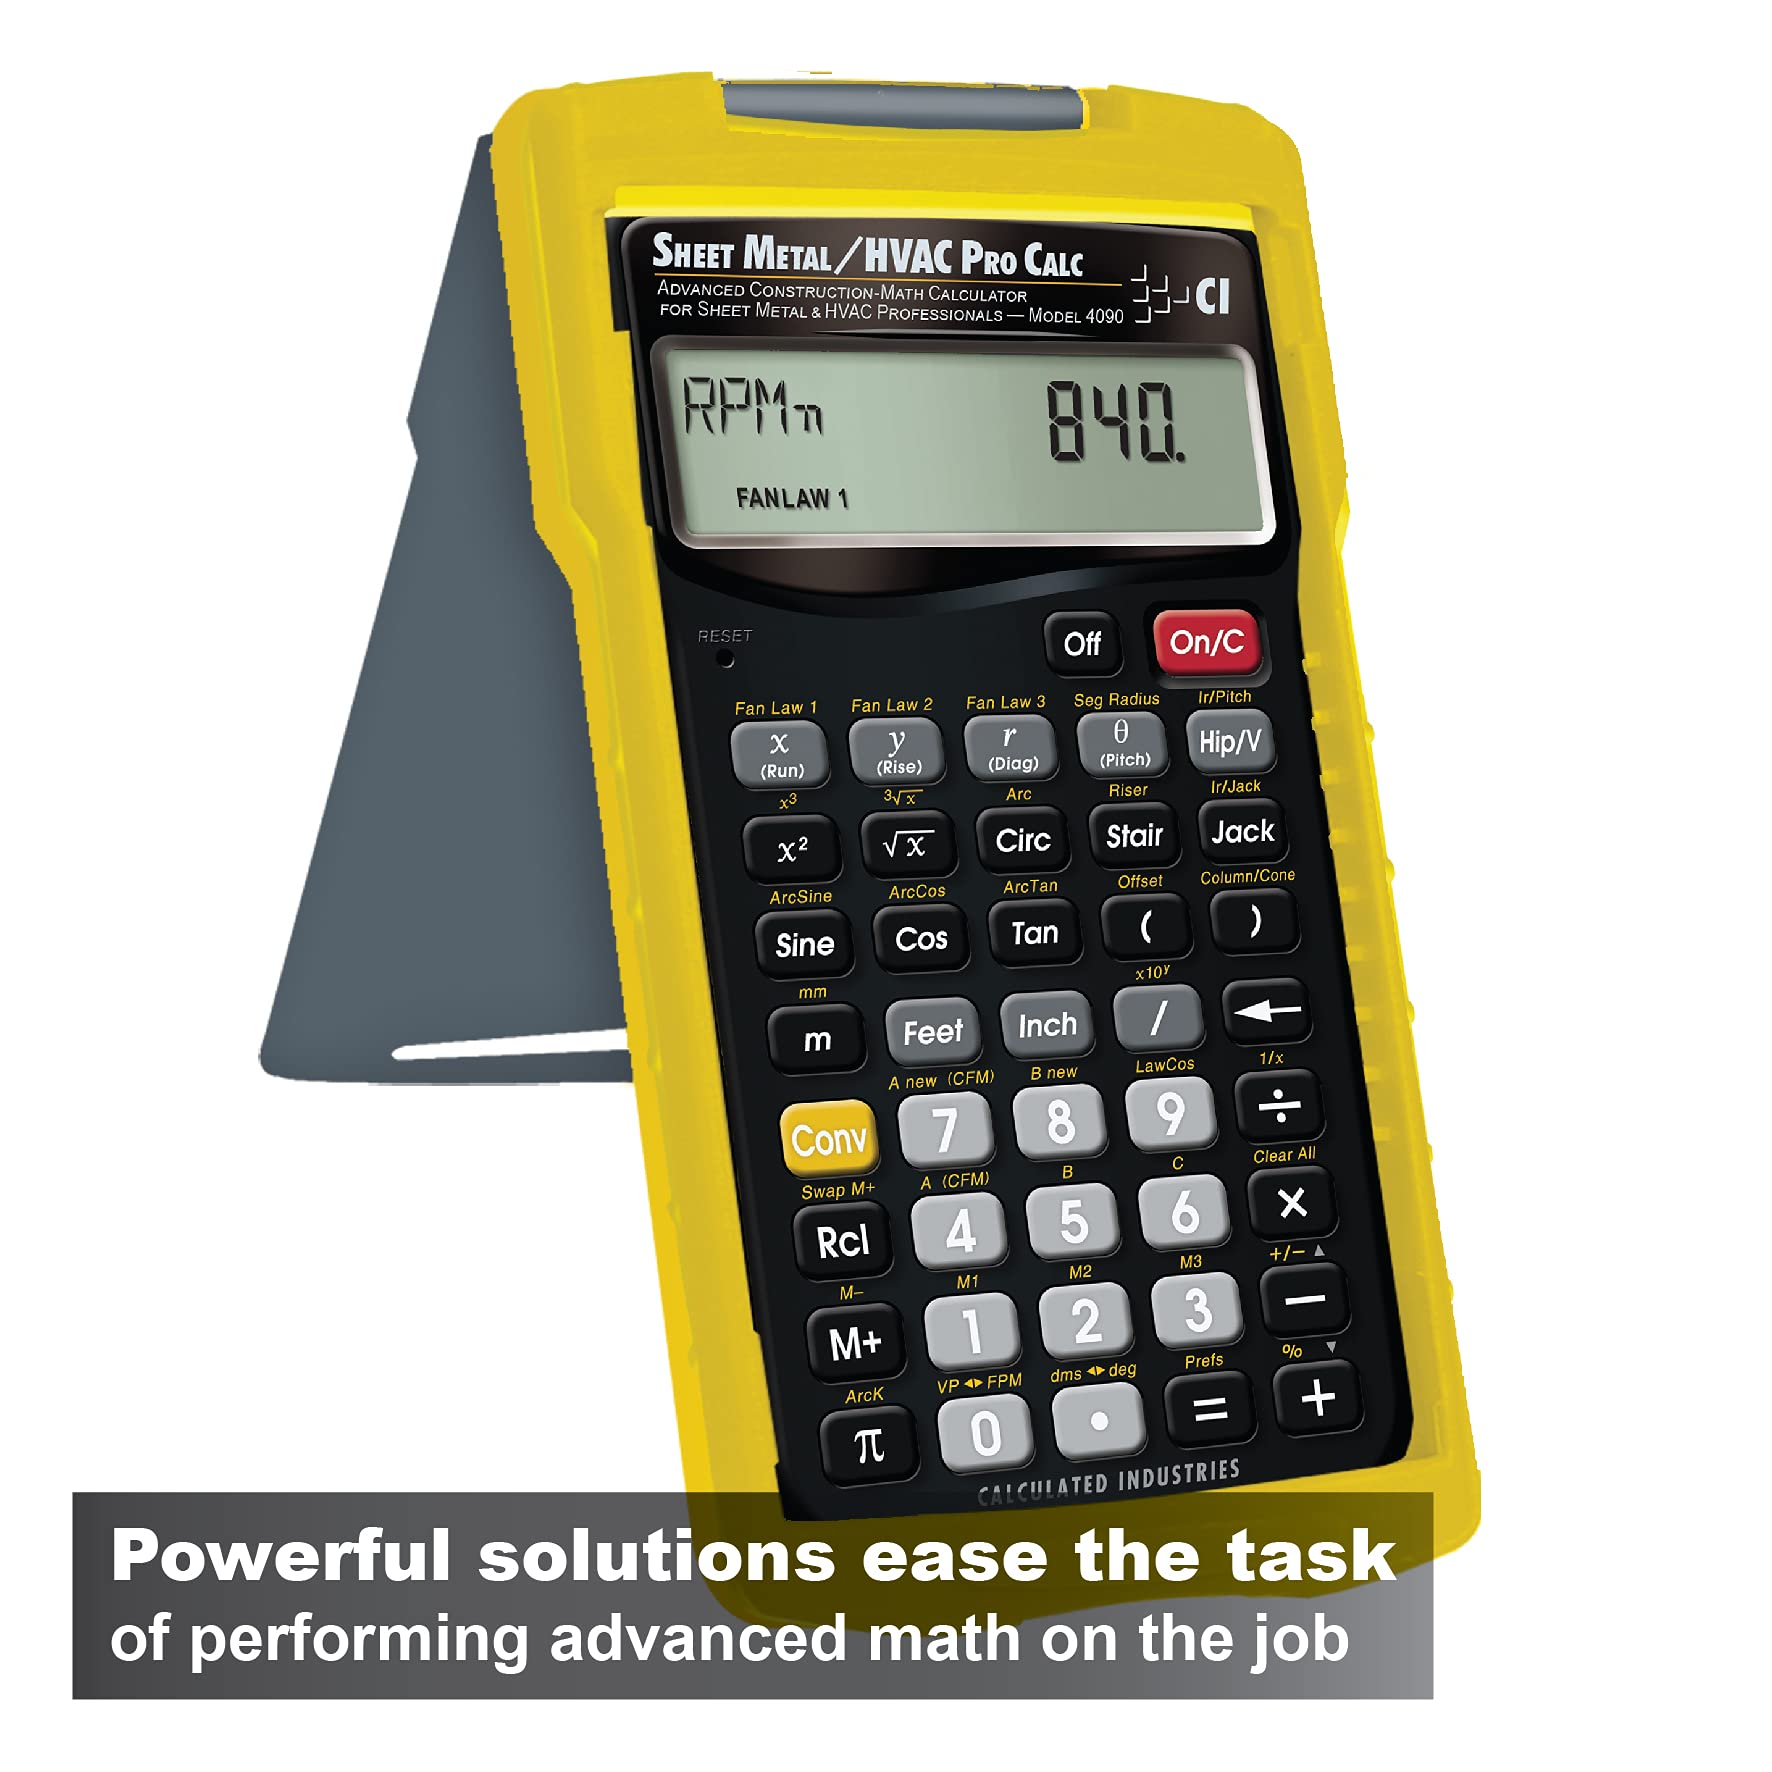 Calculated Industries 4090 Sheet Metal/HVAC Pro Calc Calculator, Advanced Construction-Math for Sheet Metal, HVAC Pros with Fan Law Functions, ArcK Built-in Constant, Laws of Cosines, Offset Functions